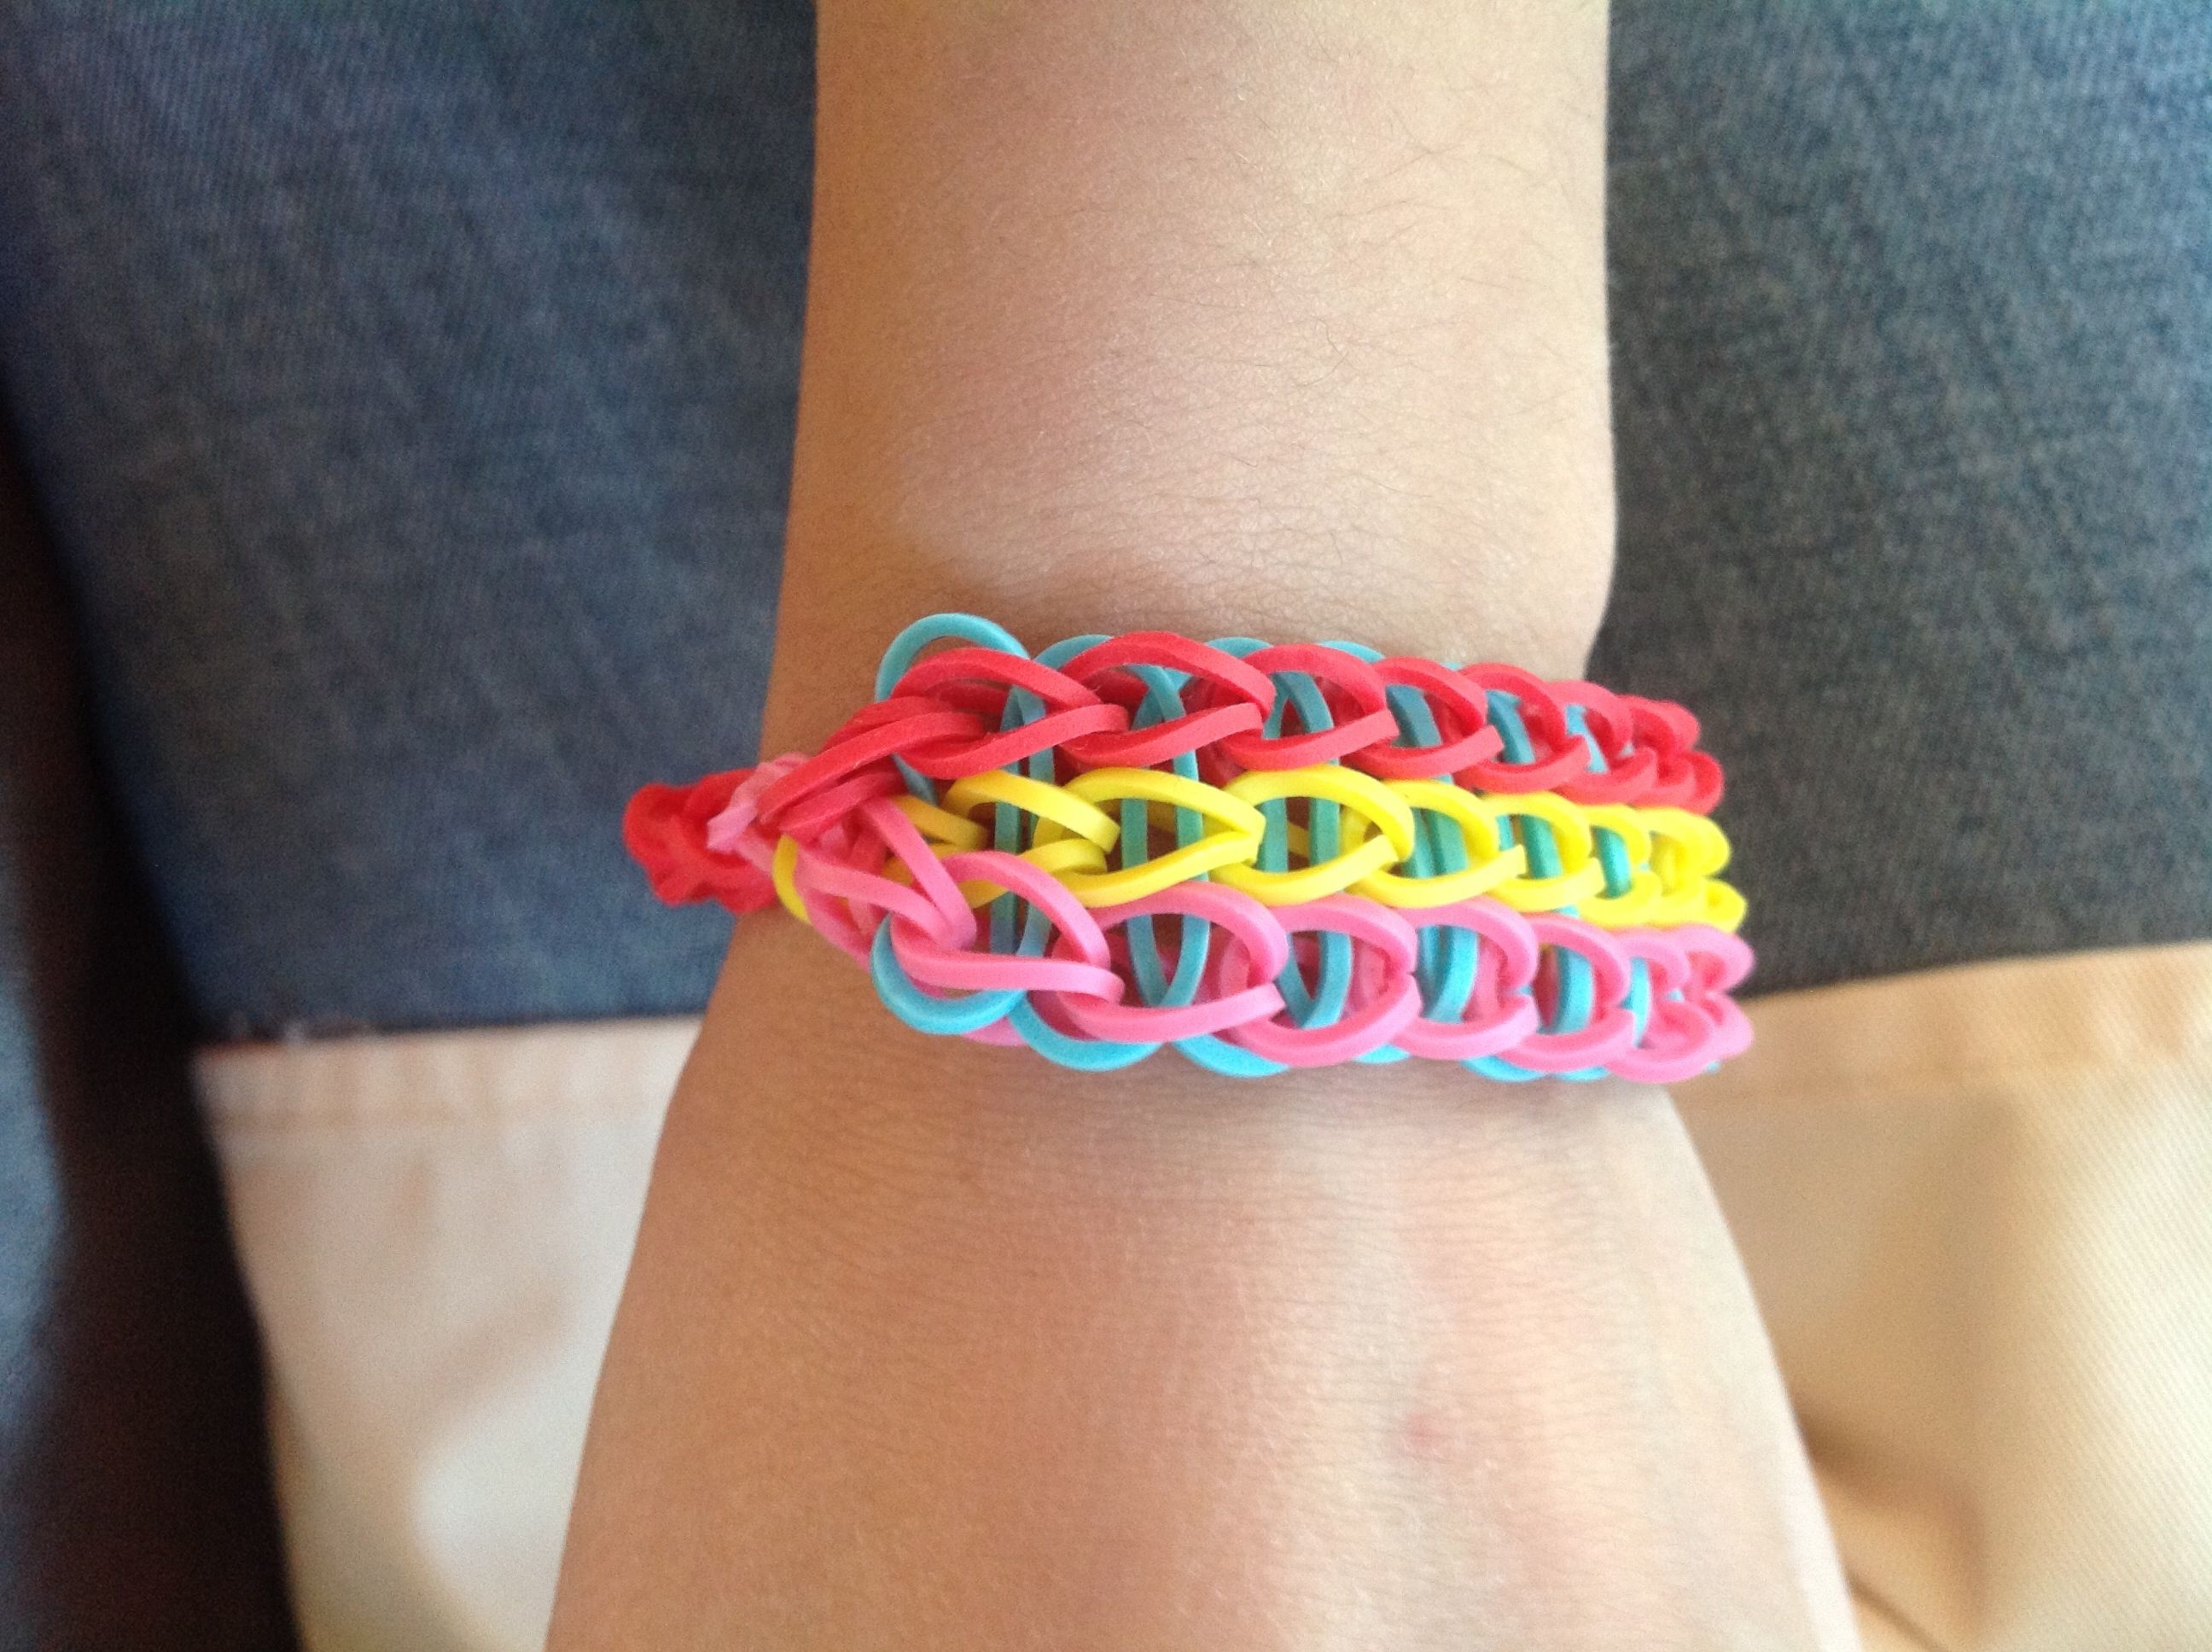 loom band designs instructions